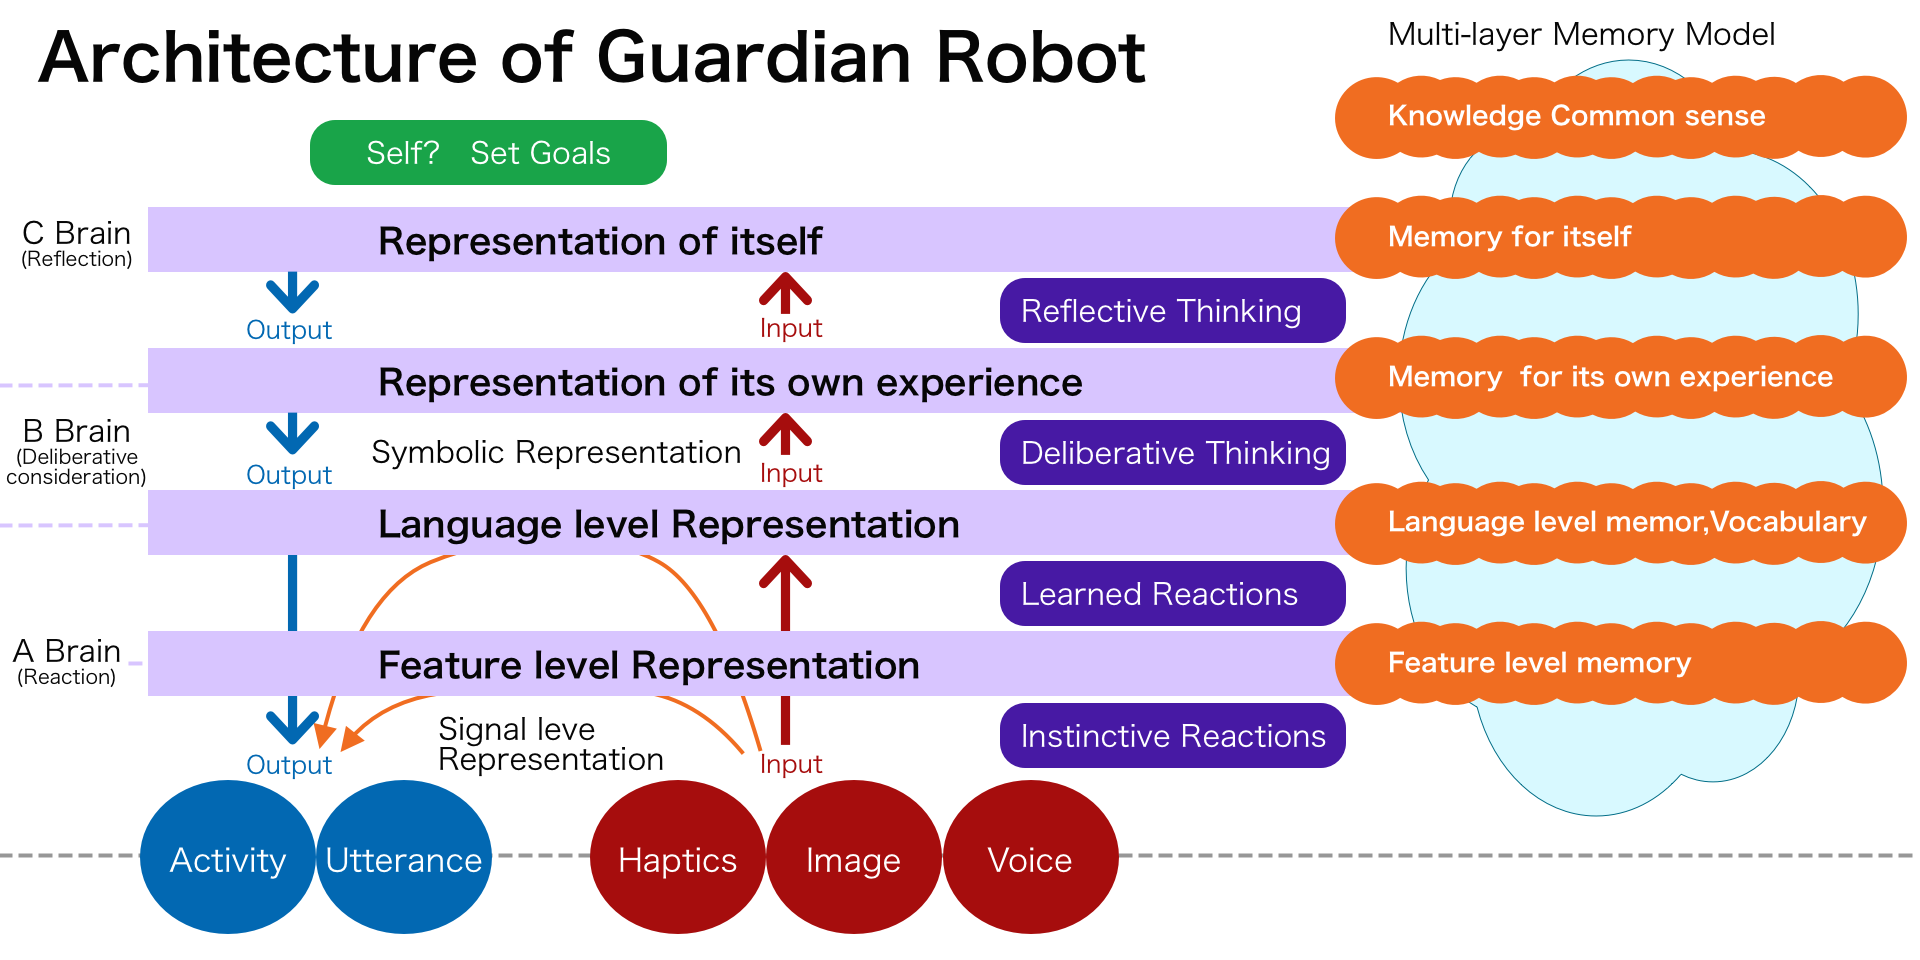 Architecture of Guardian Robot